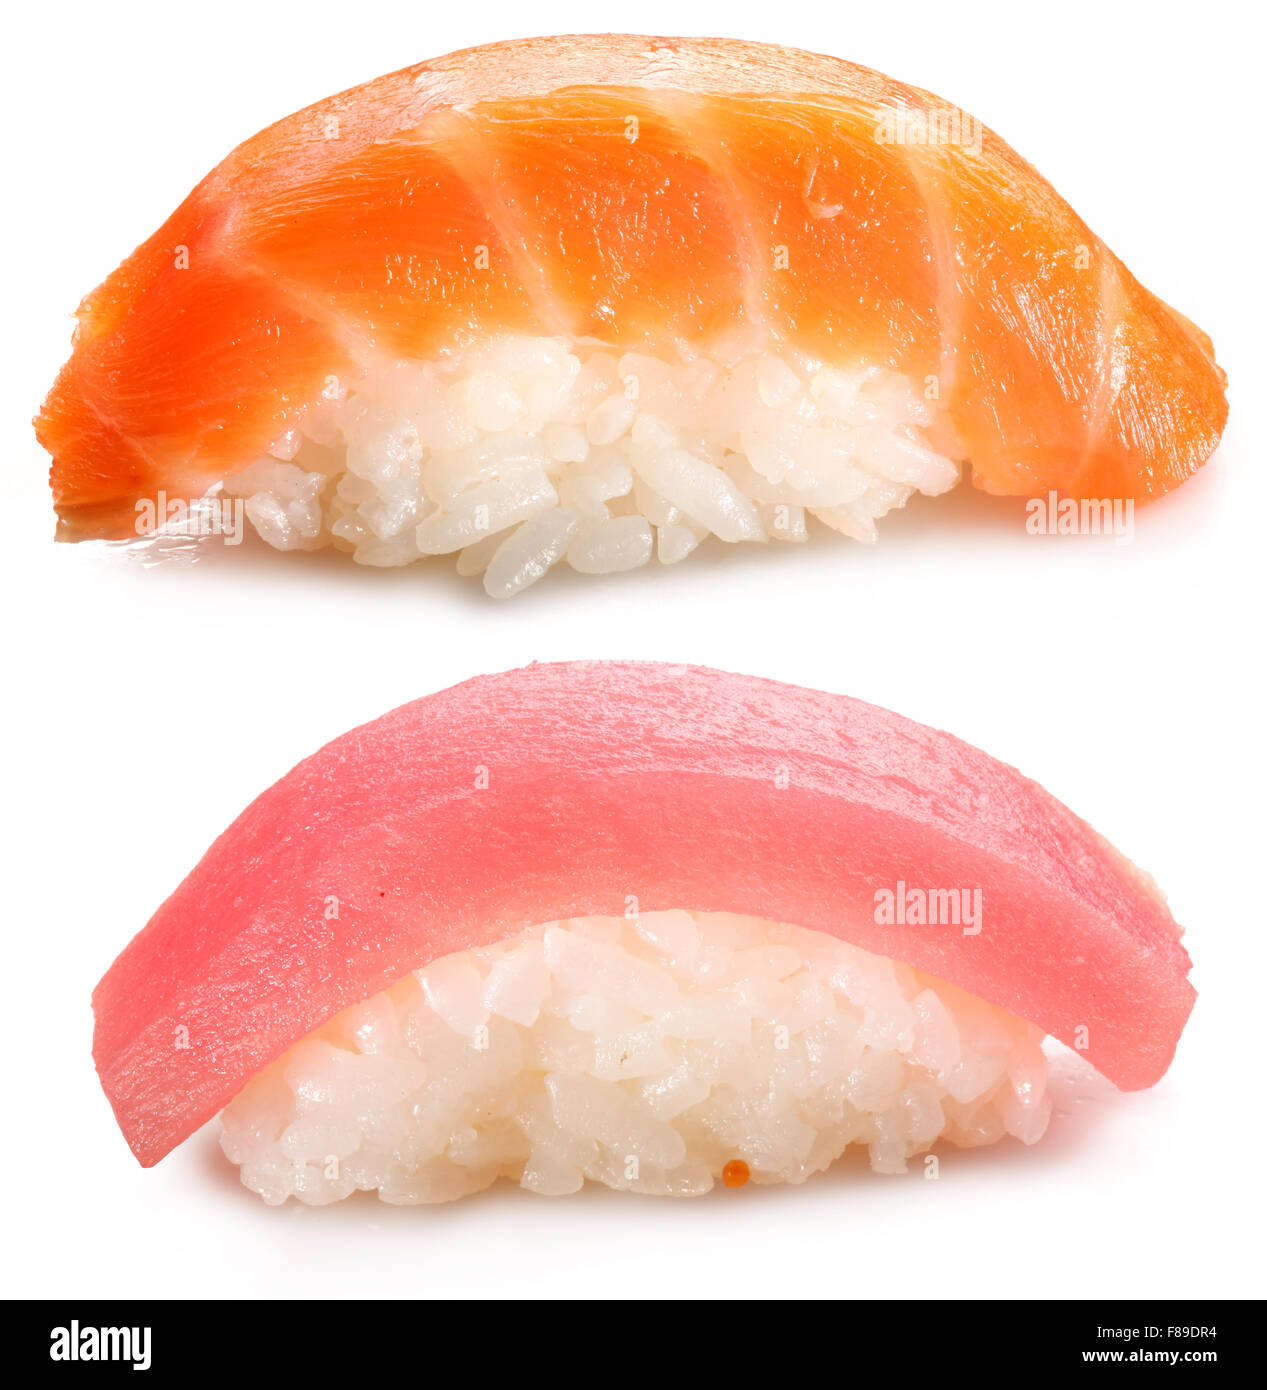 Sushi - traditional Japanese food.  File contains clipping paths. Stock Photo